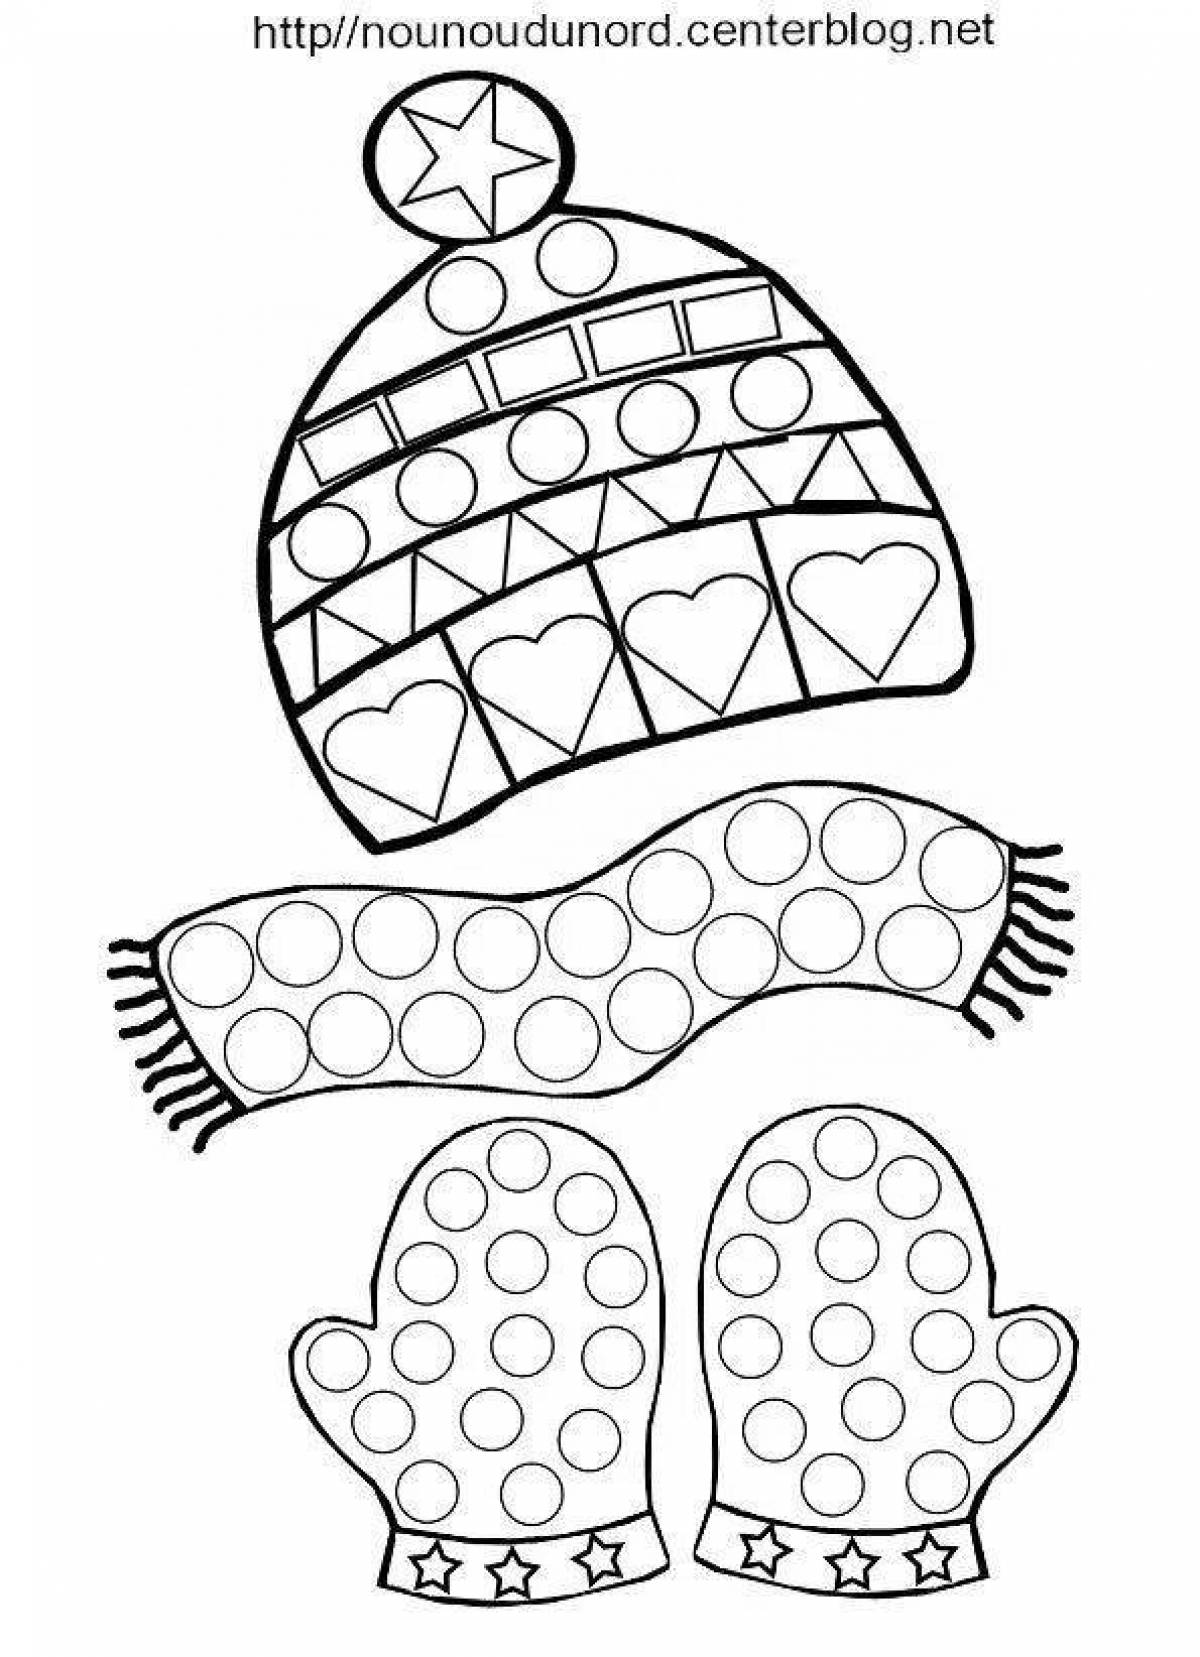 Coloring page elegant hat and scarf